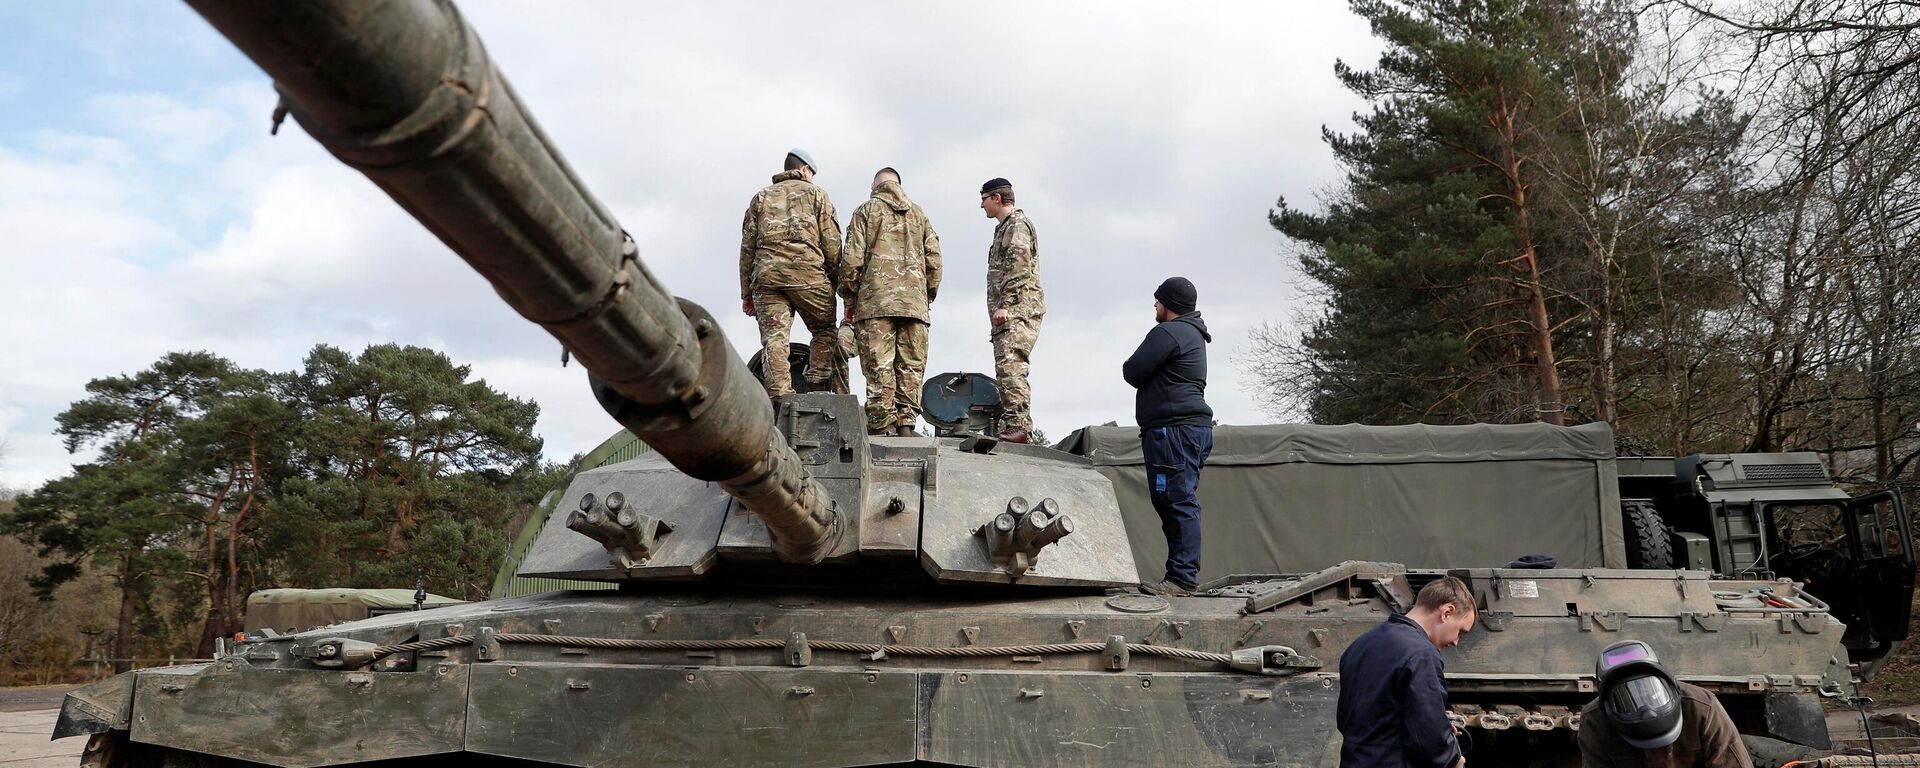 Soldiers work on a Challenger 2 main battle tank during during the Royal Electrical & Mechanical Engineers’ training exercise called Iron Challenge at the Longmoor training area, near Bordon, Hampshire, on March 14, 2022 - Sputnik International, 1920, 18.01.2023